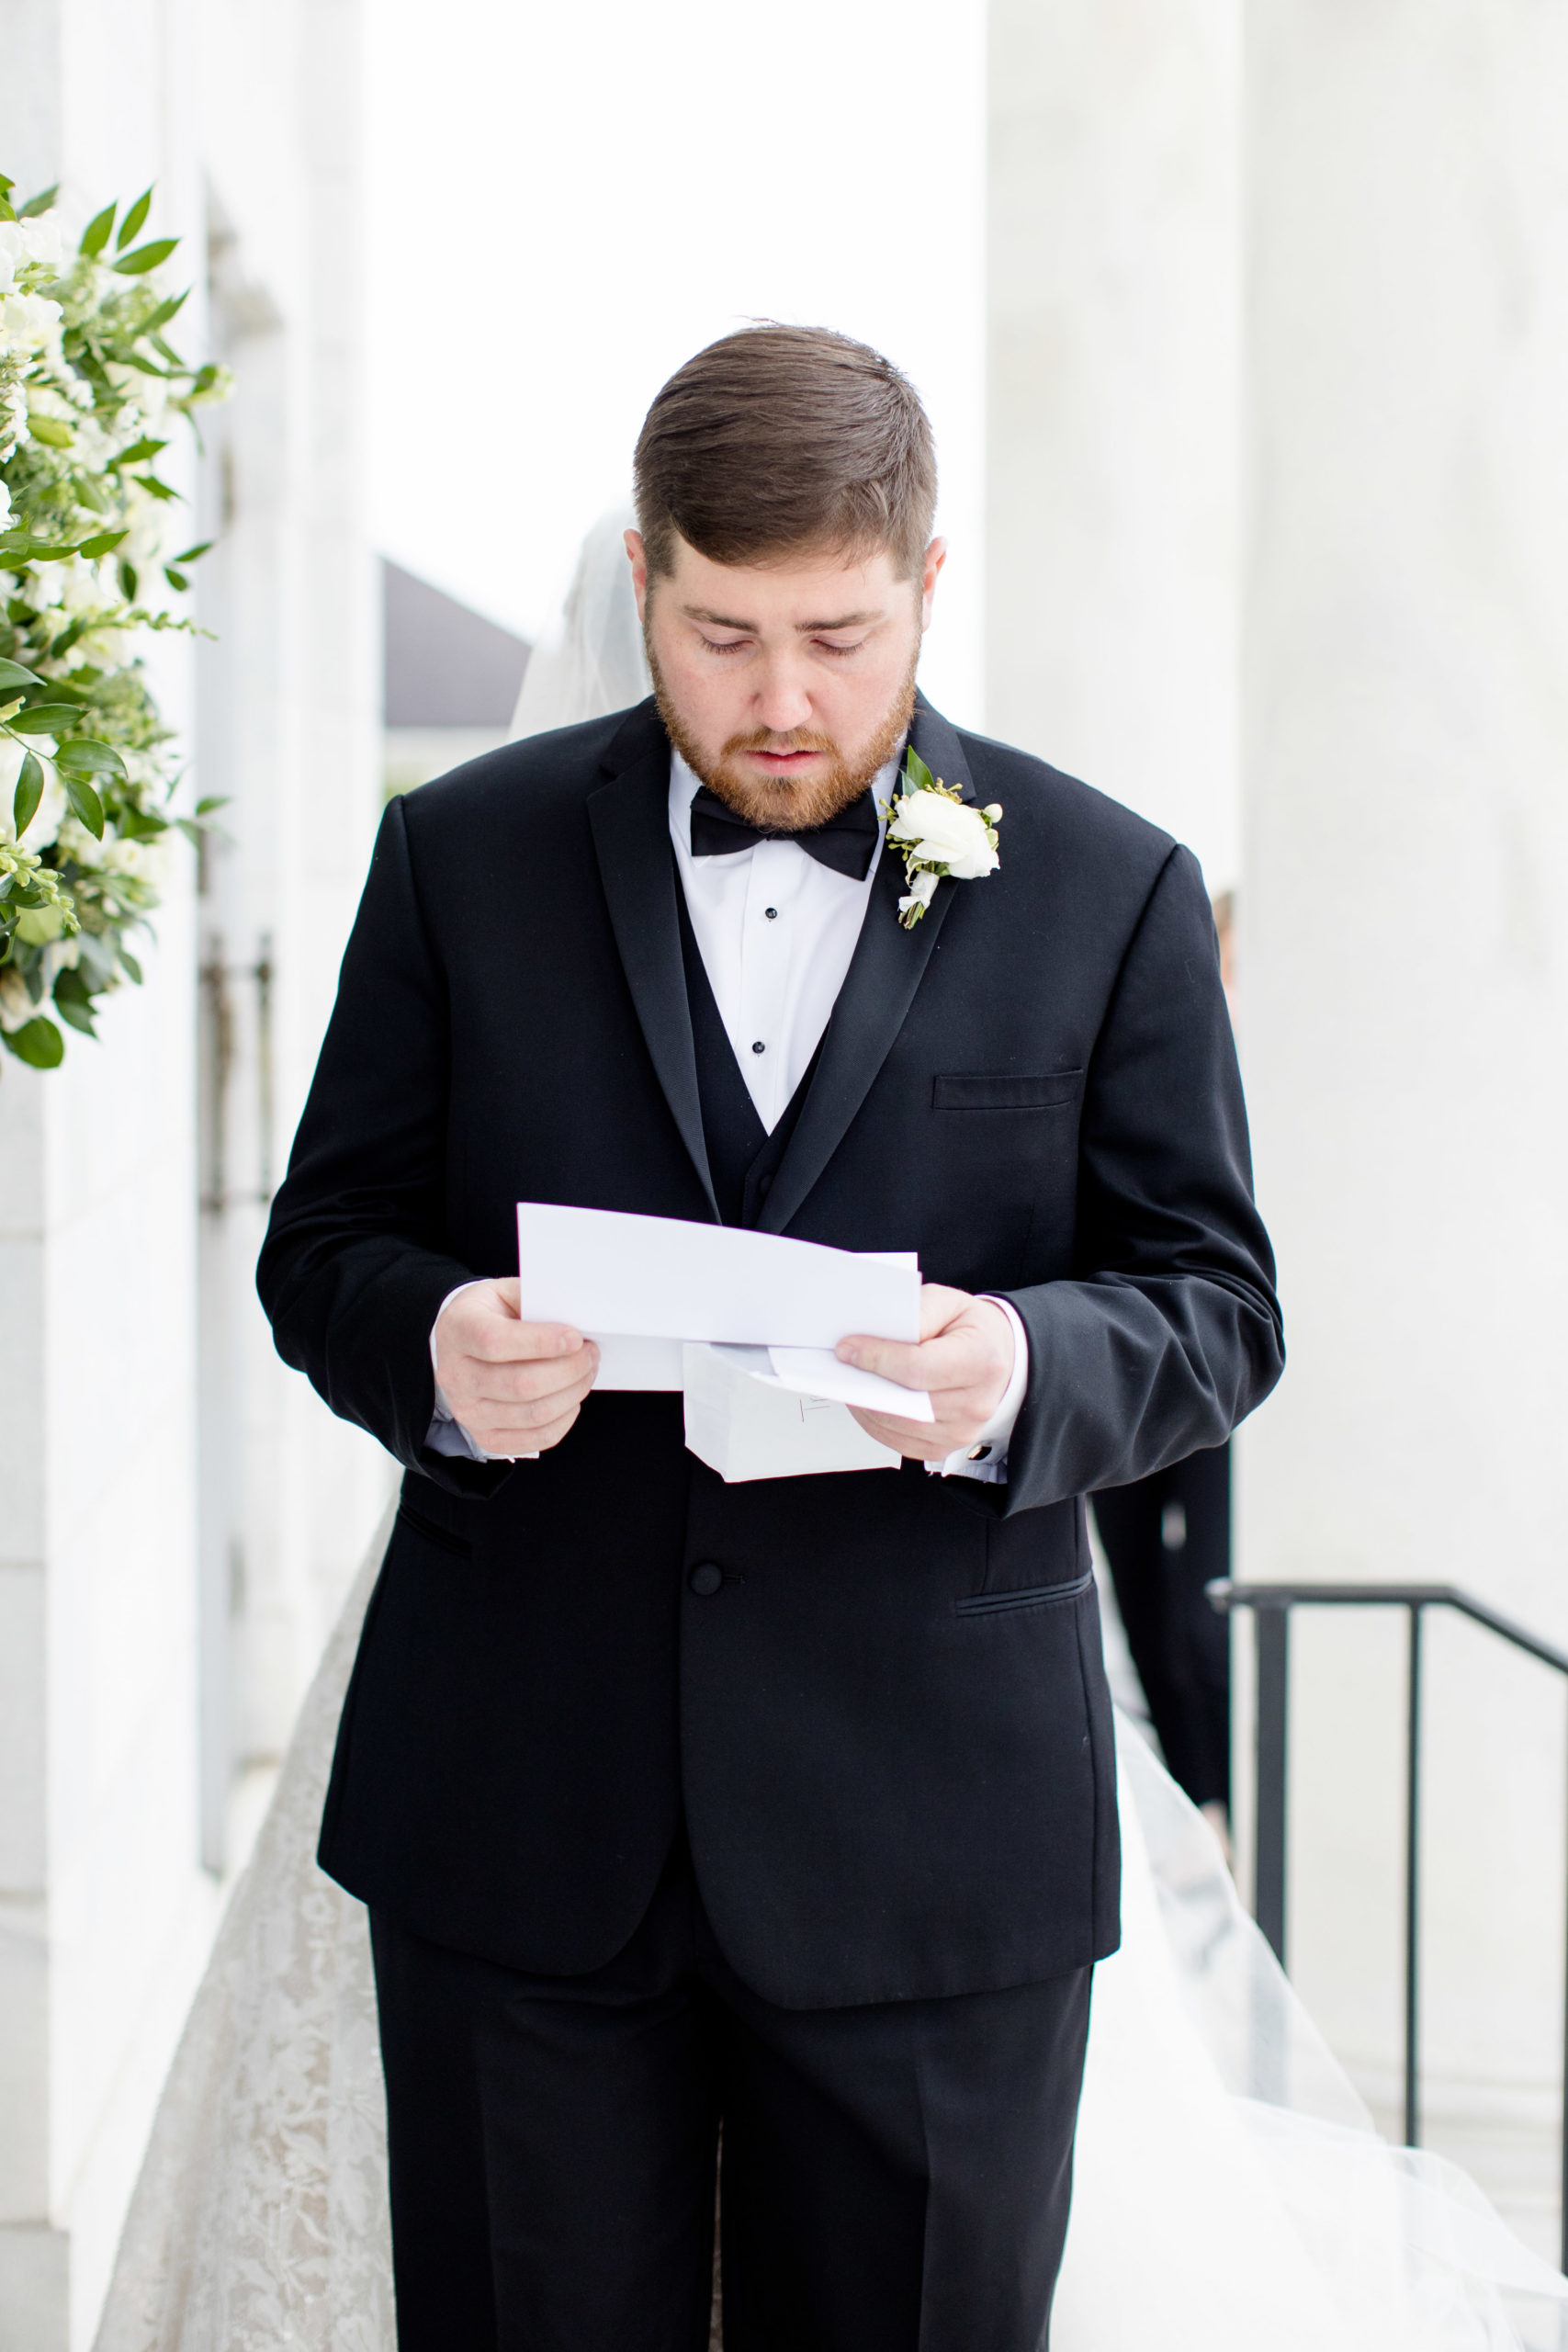 Groom reads letter from bride.